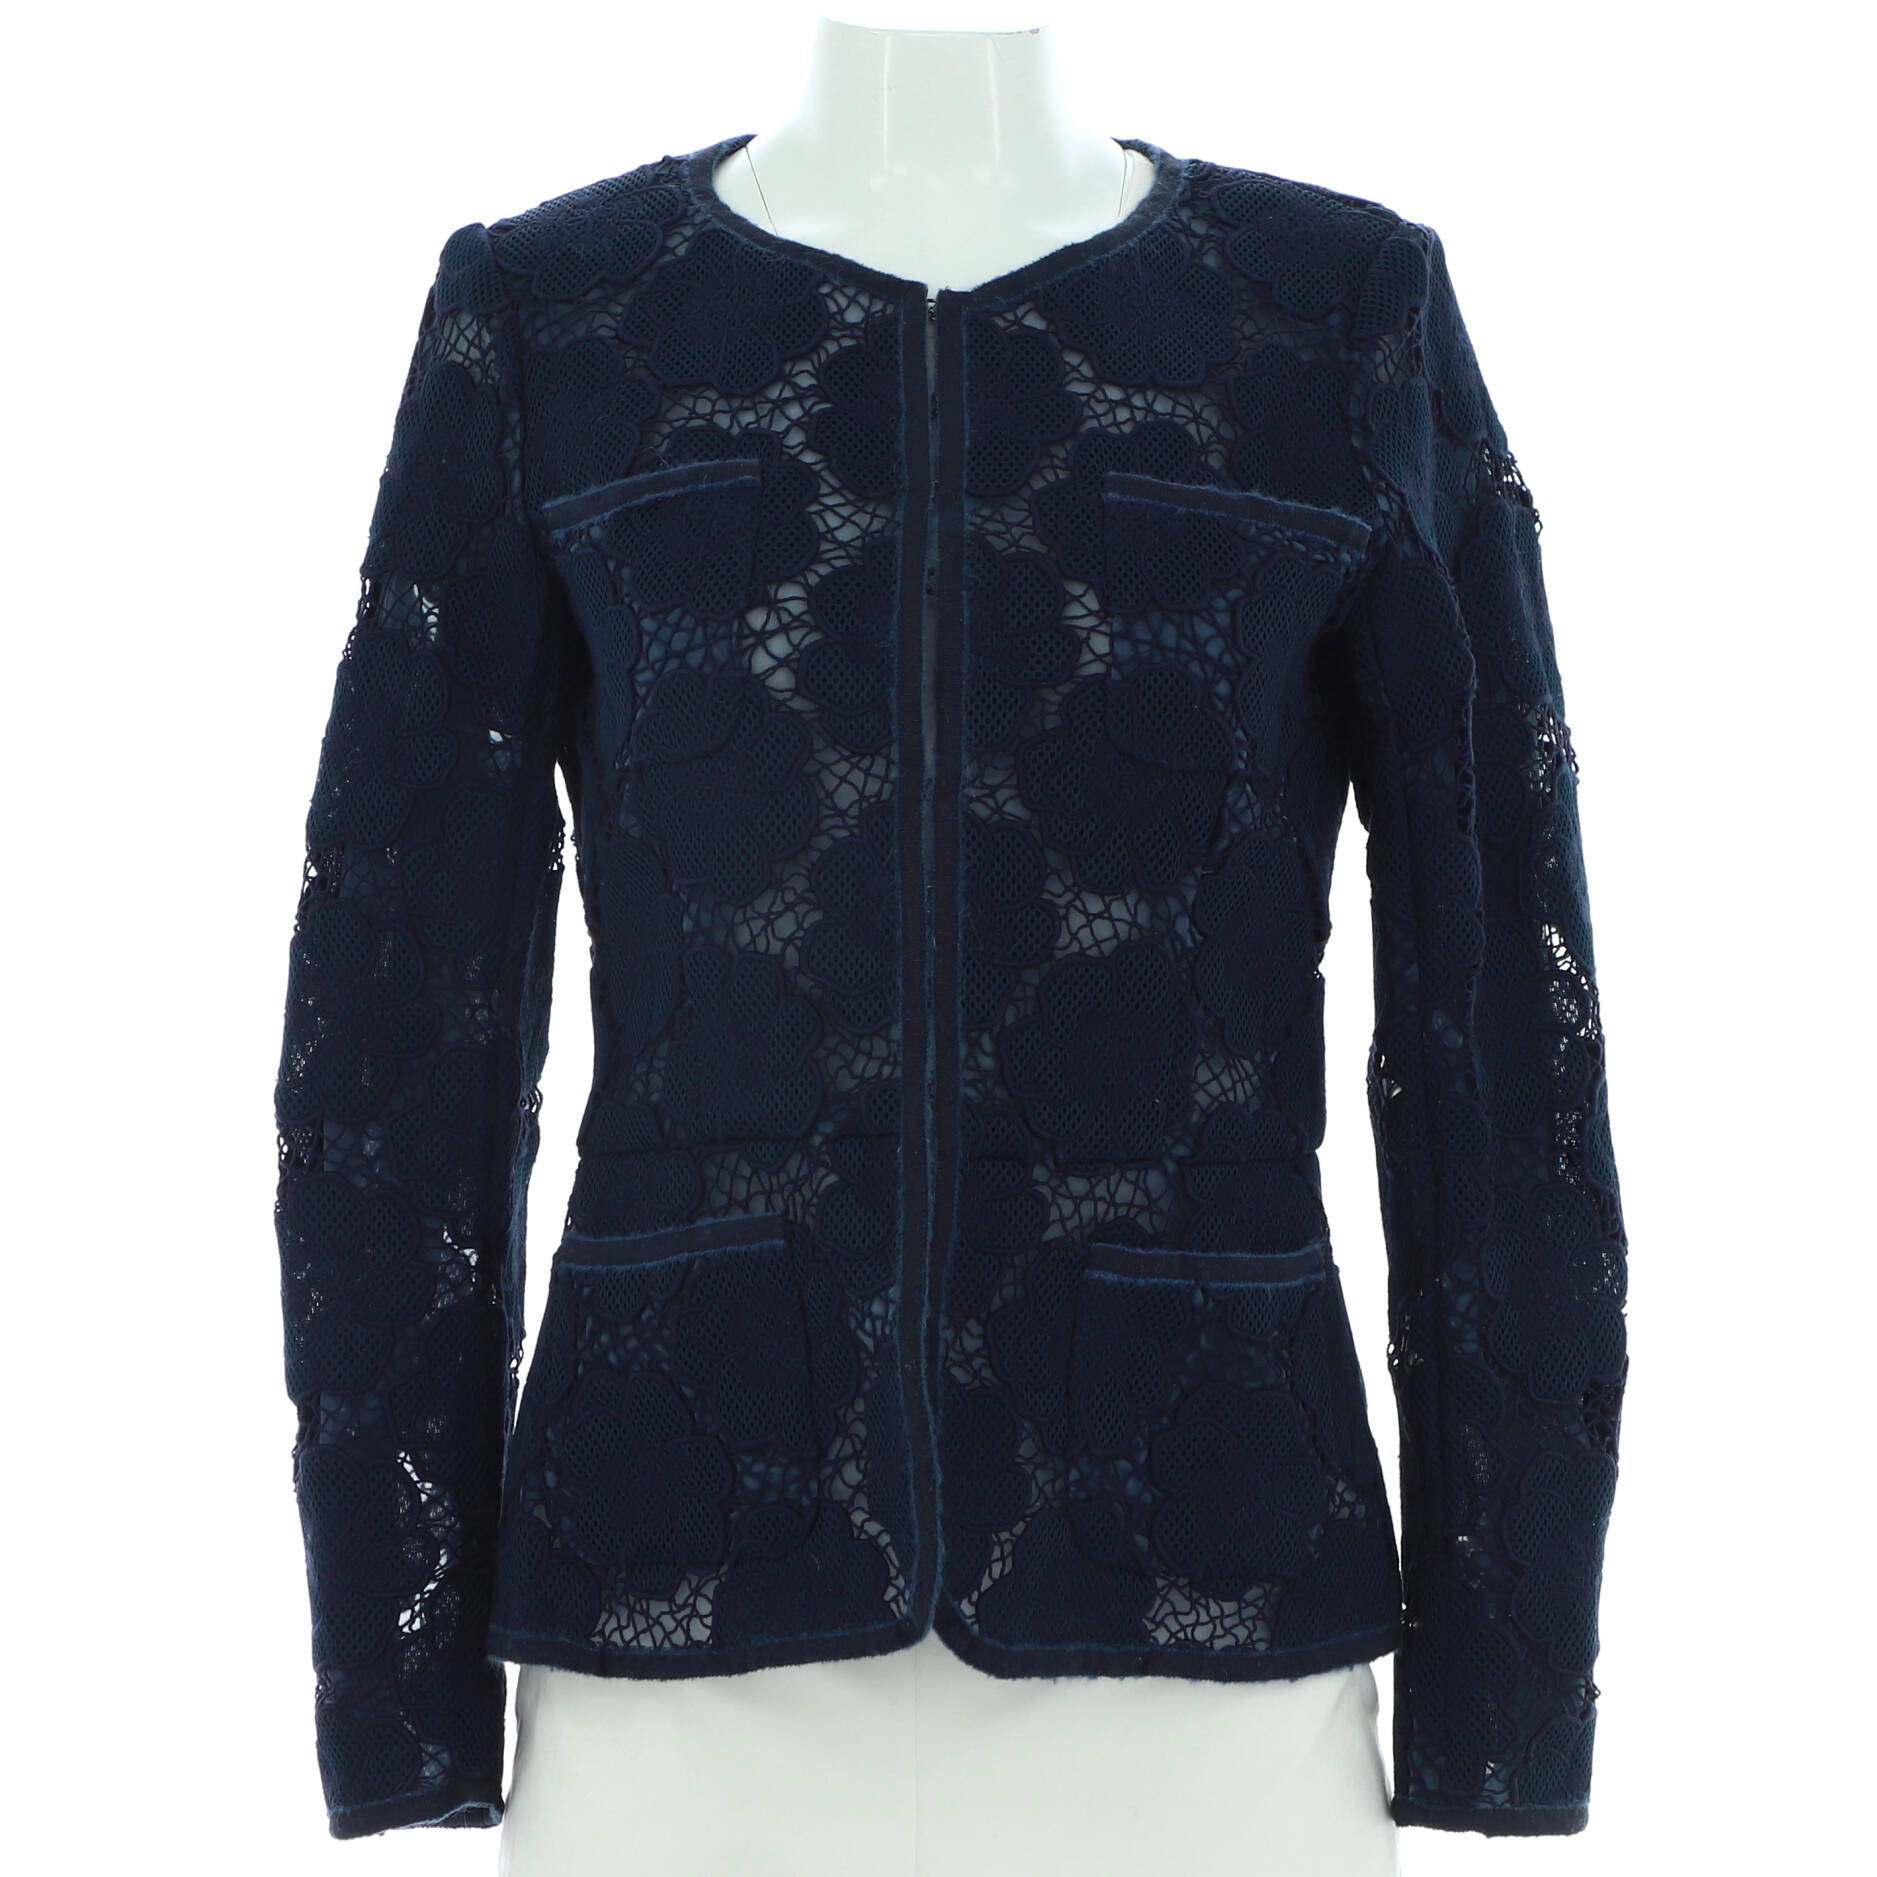 Women's Embroidered Camellia Four Pocket Jacket Polyester and Cotton Blend